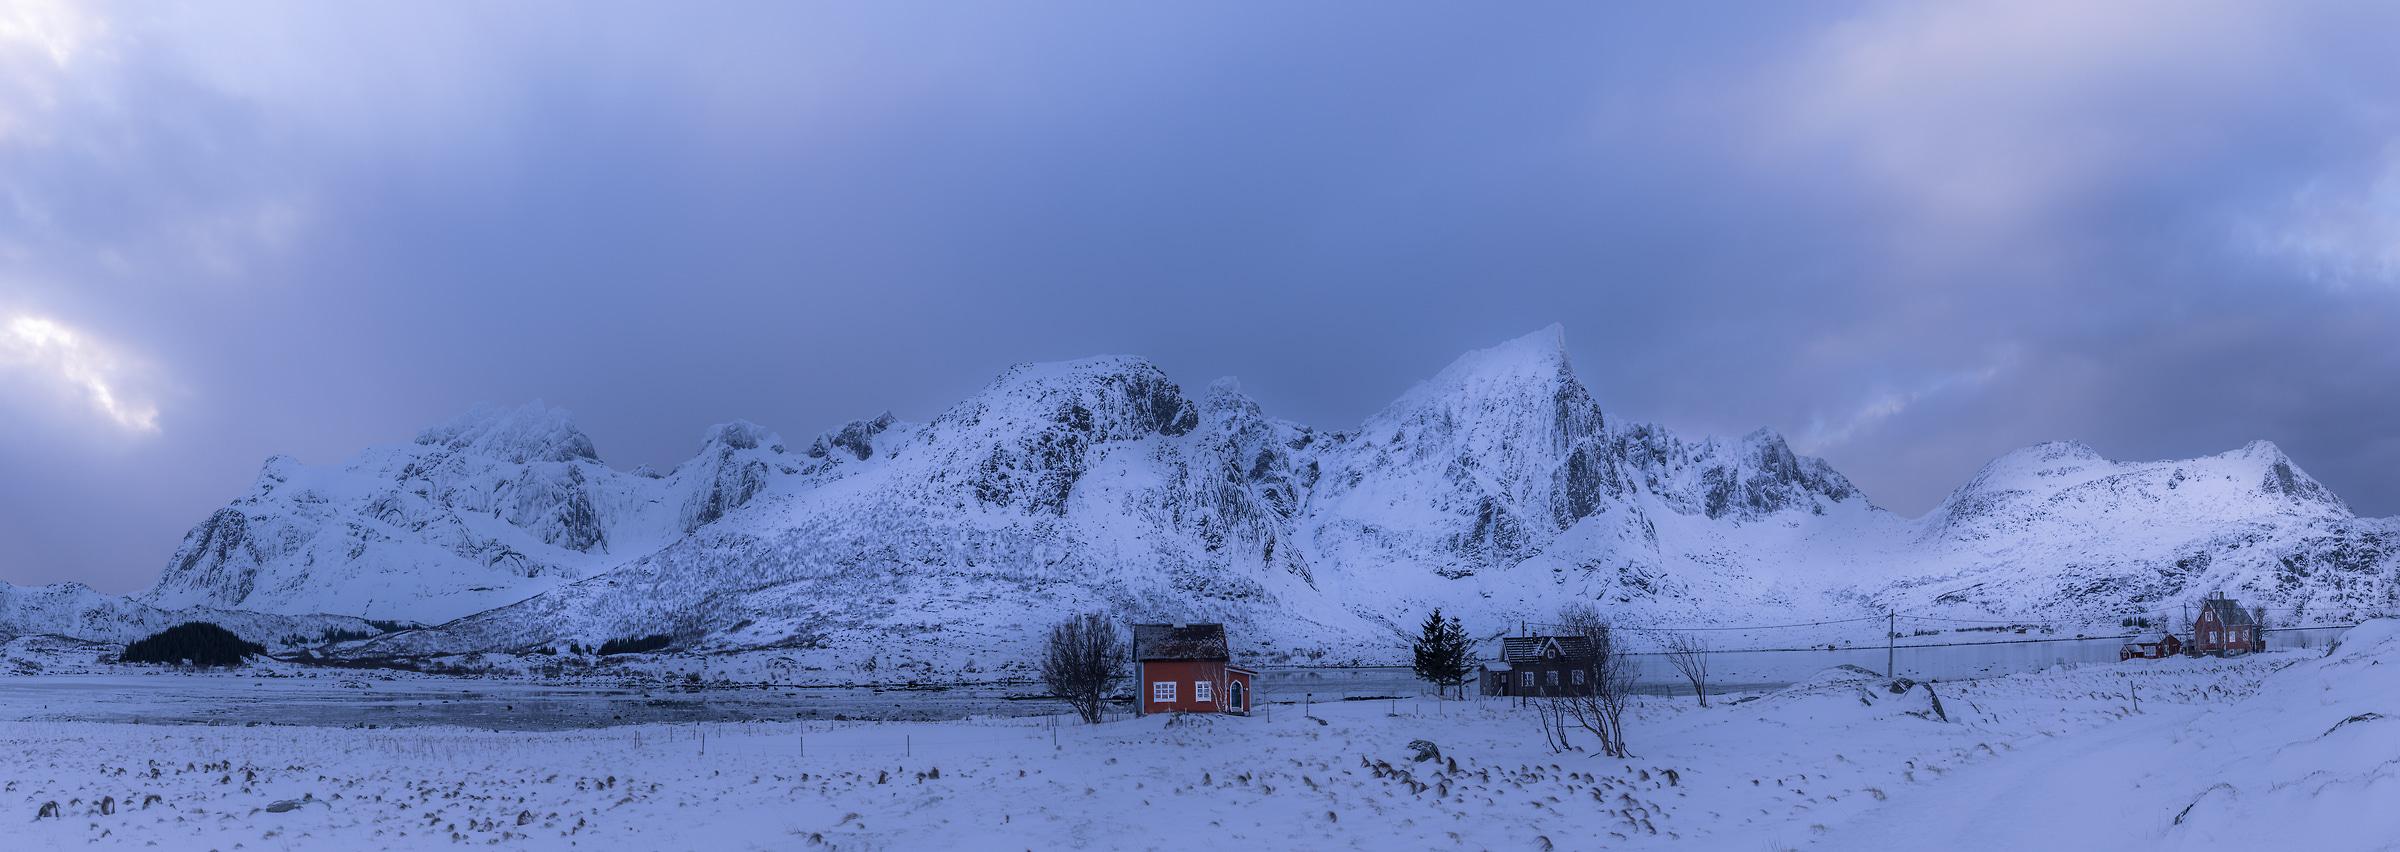 129 megapixels! A very high resolution, large-format VAST photo print of a landscape with mountains and a red house; landscape photograph created by Alfred Feil in Napp, Flakstad, Lofoten, Norway.